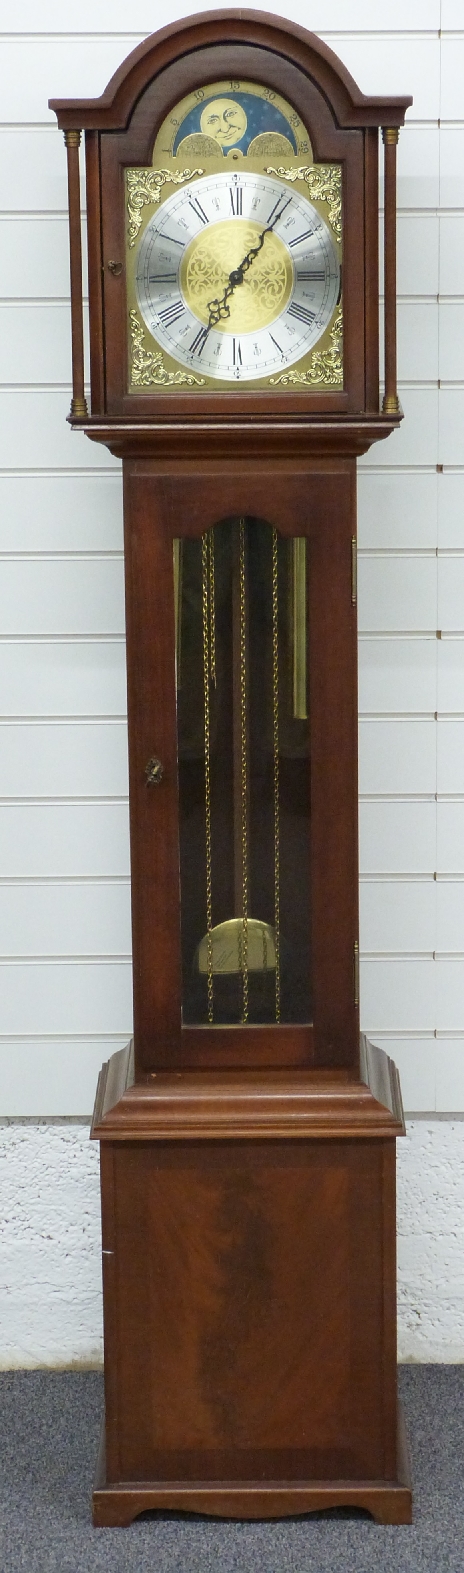 20thC grandmother longcase clock in earlier style, the mahogany case with glazed door, the two